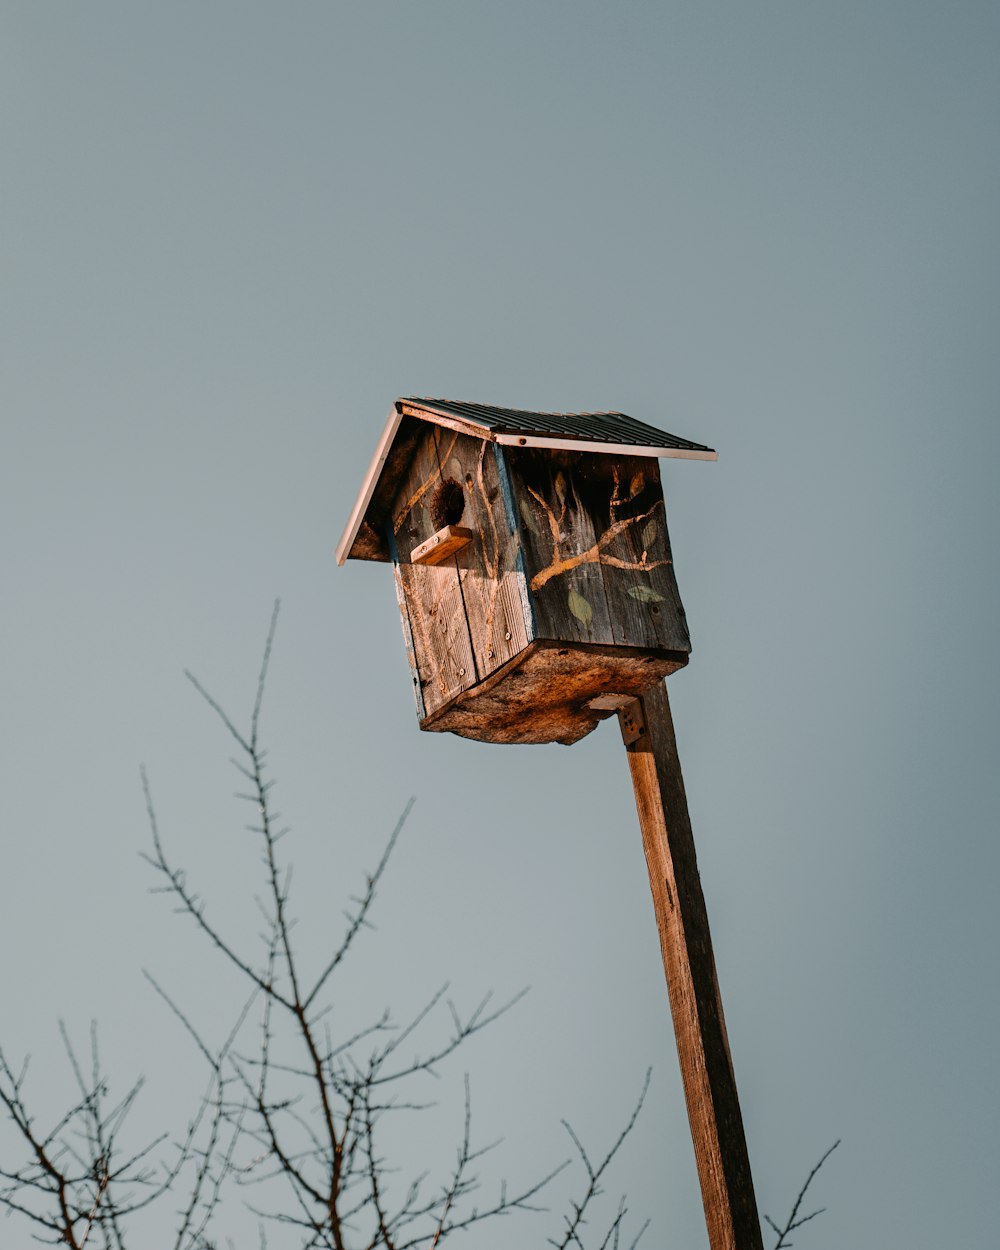 a bird house on top of a wooden pole